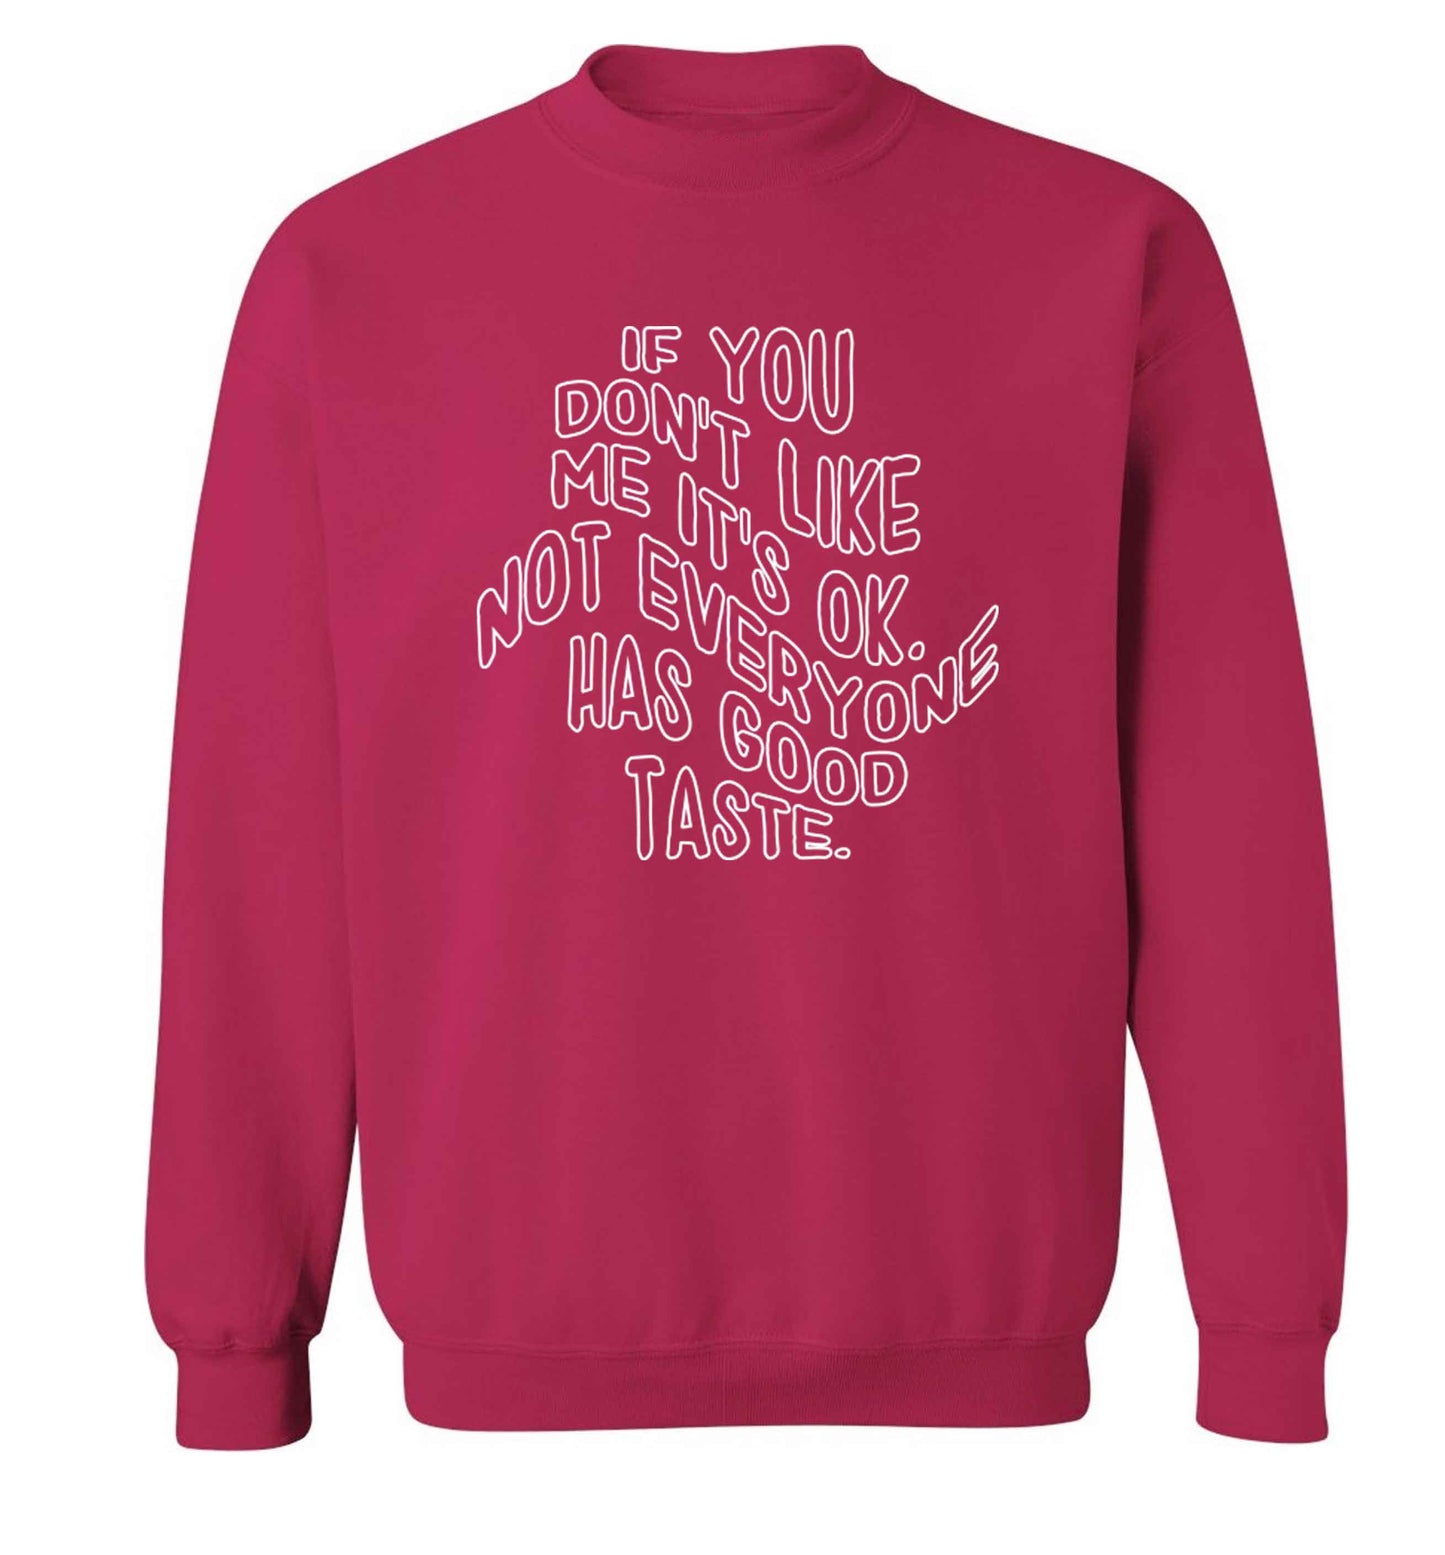 If you don't like me it's ok not everyone has good taste adult's unisex pink sweater 2XL